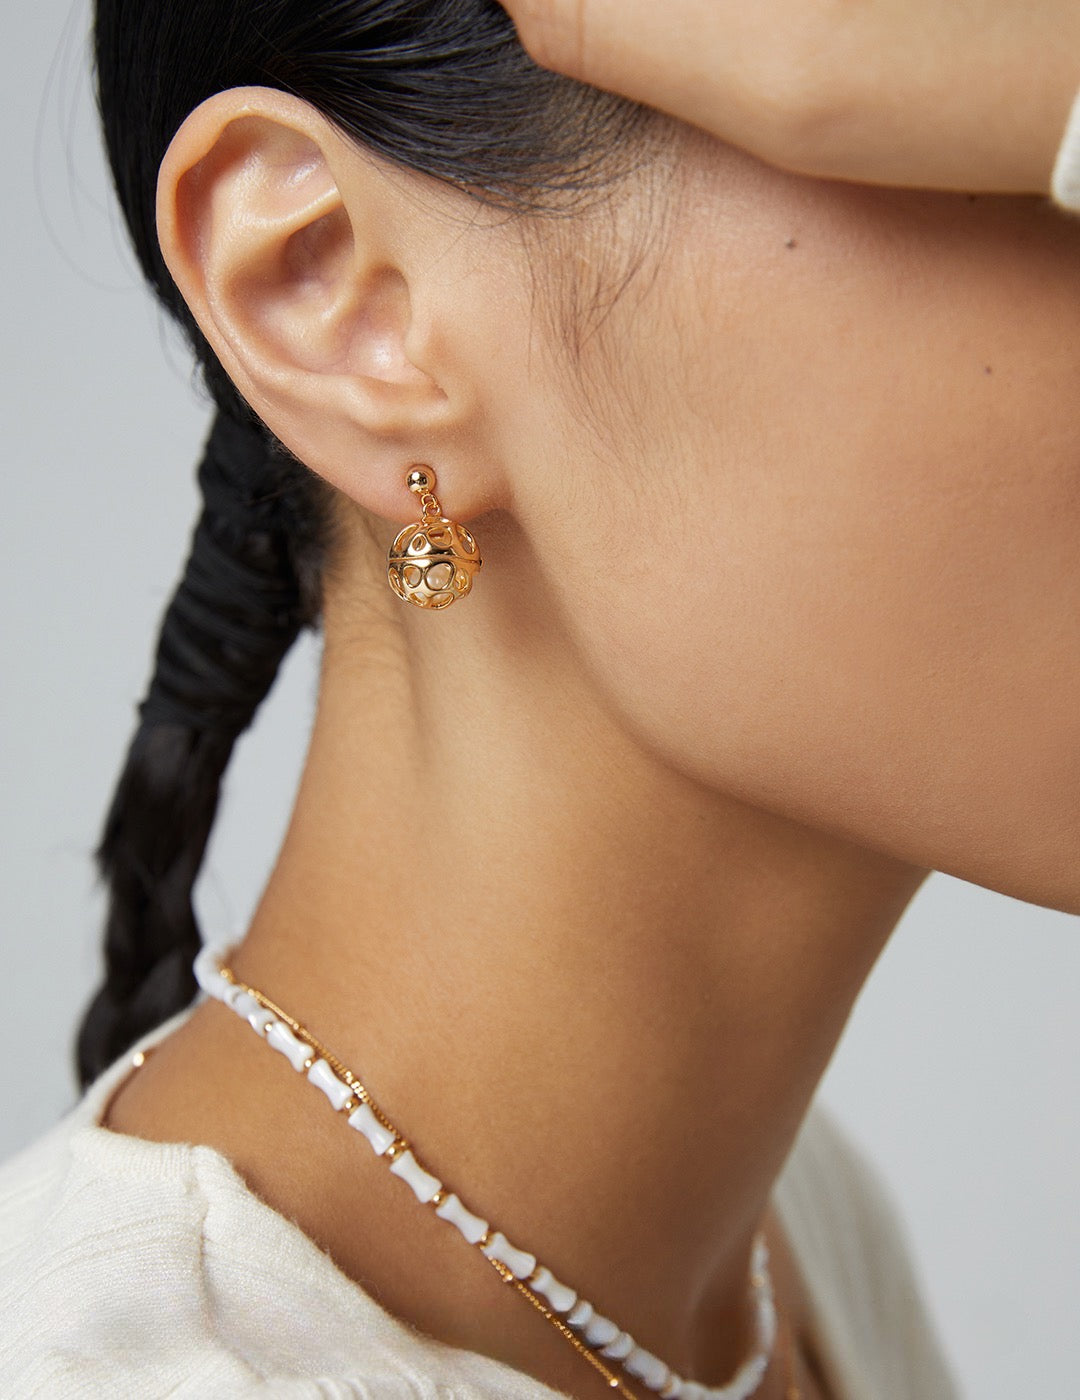 Earrings Embracing the Beauty of Simplicity - S925 Sterling Silver with 18K Gold Vermeil - Elevate your style with these stunning pieces that capture the essence of beauty. Designed to make you shine, these Earrings are a must-have for any occasion